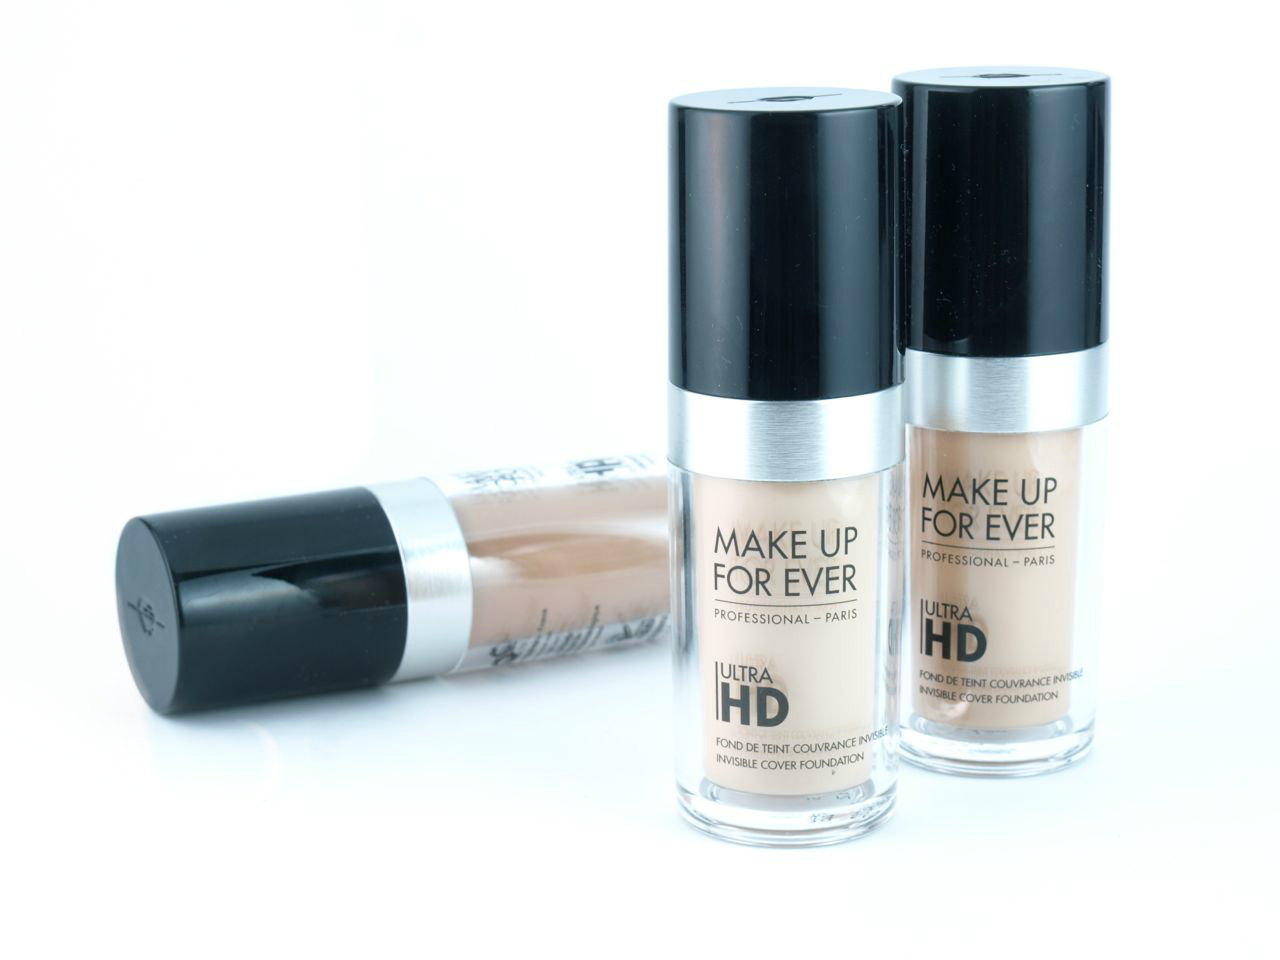 MAKE UP FOR EVER Ultra HD Foundation reviews, photos, ingredients - MakeupAlley